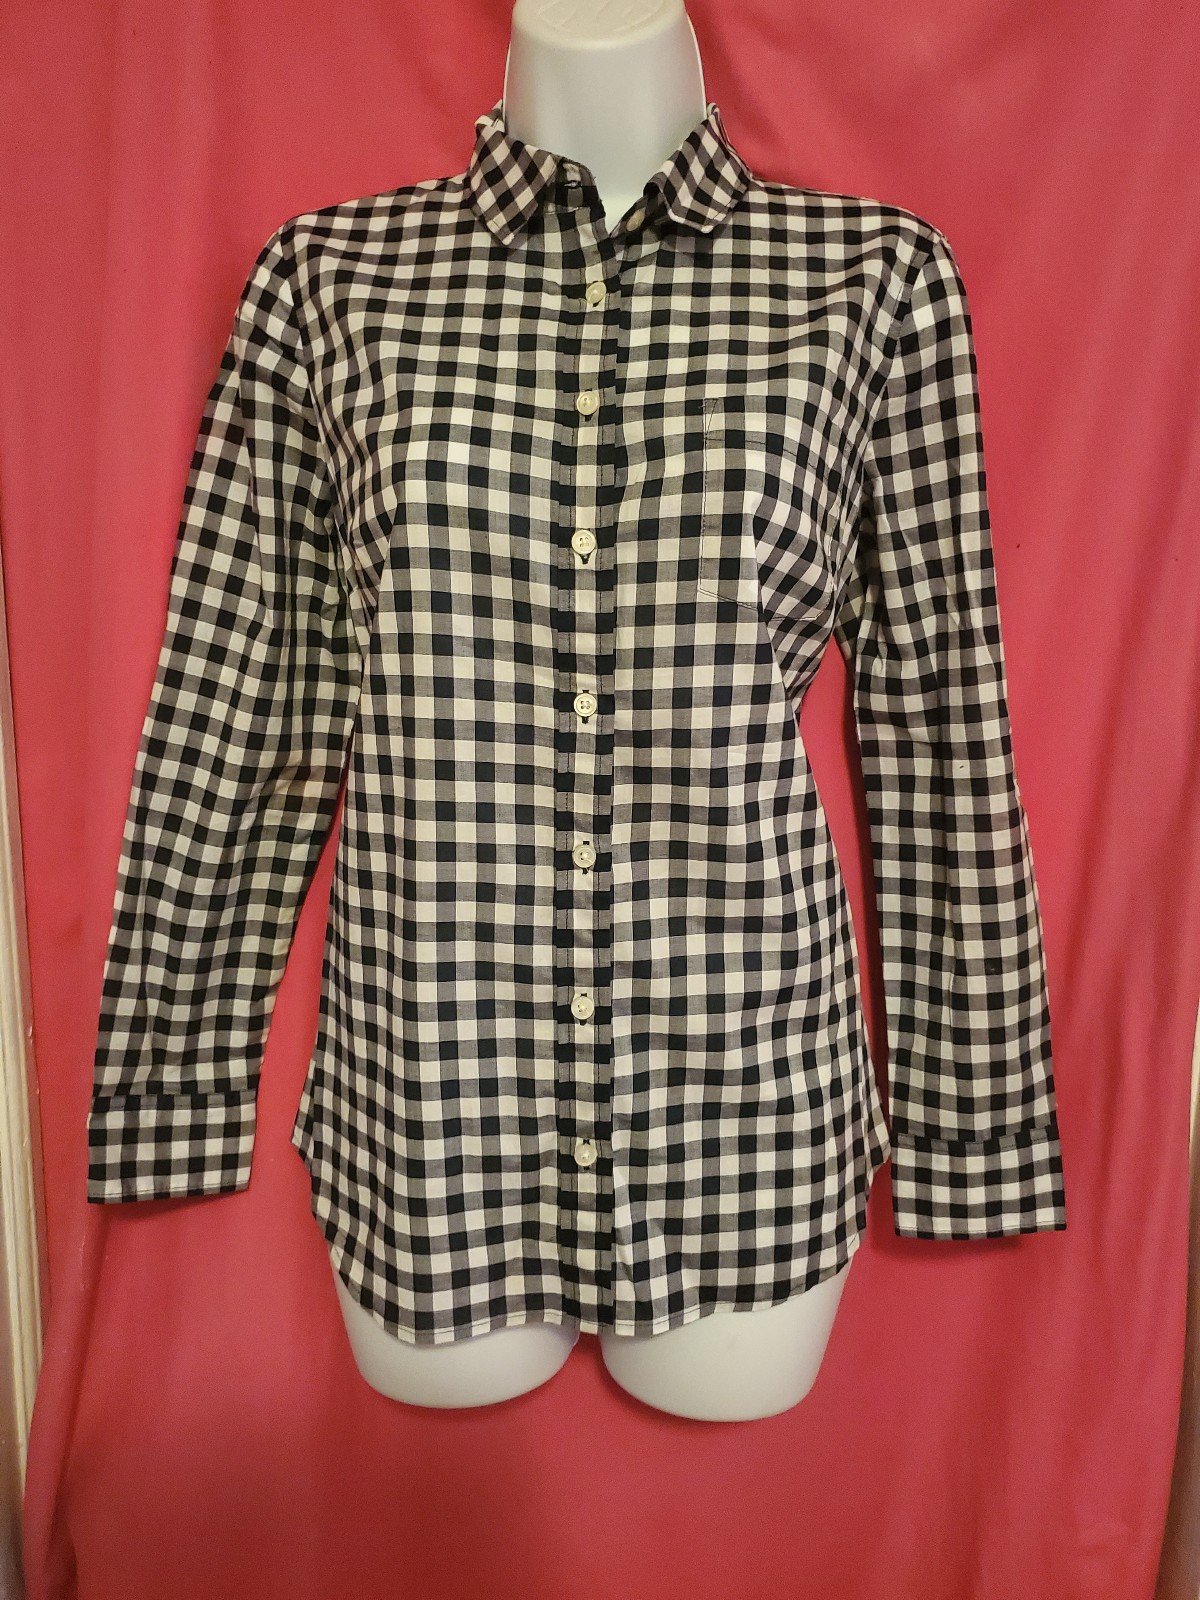 Amazing #1183 New With Tags J. Crew top ng8AqUjWd US Outlet